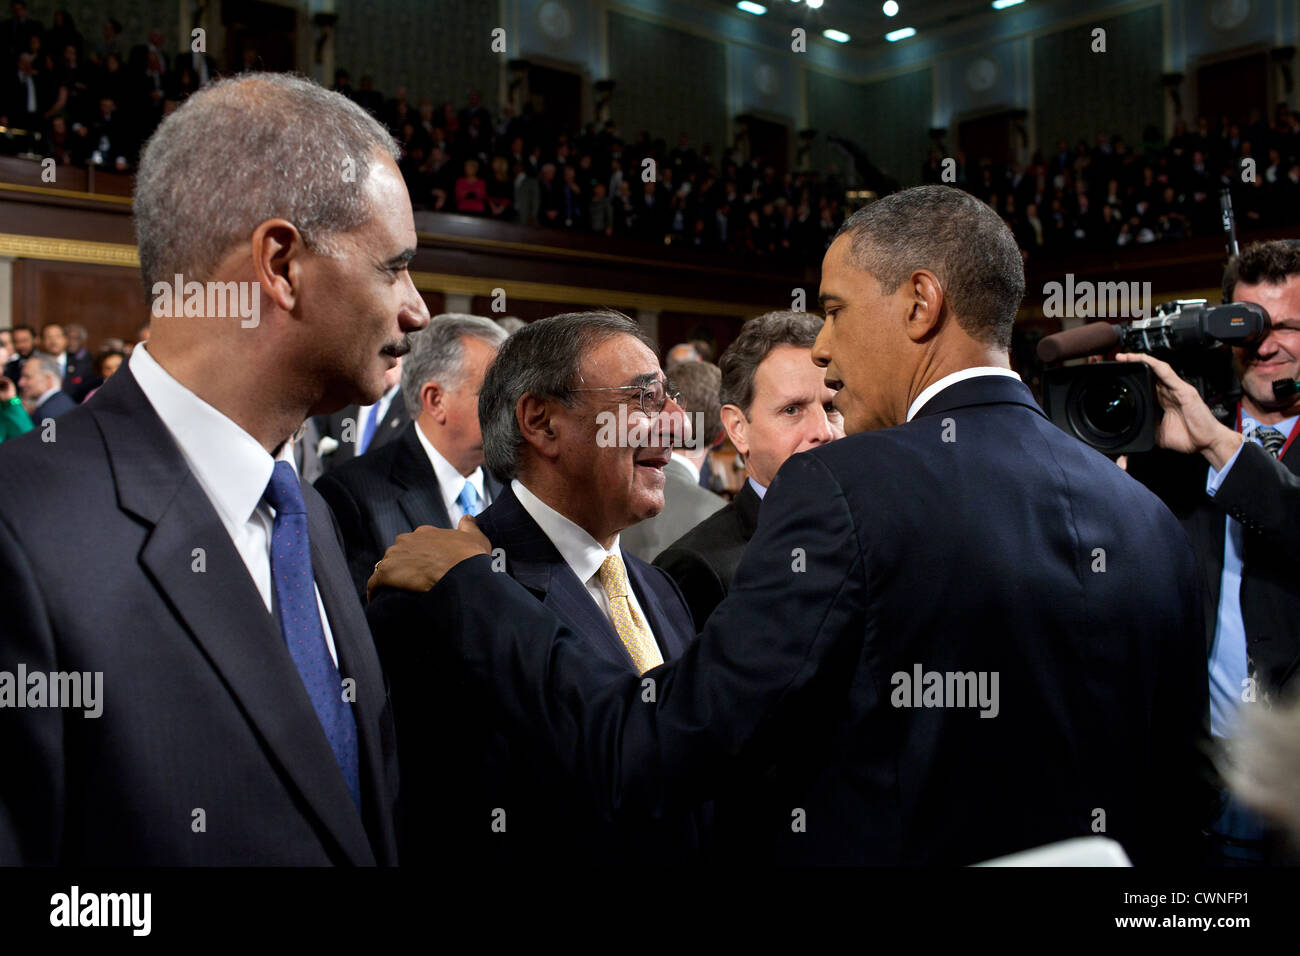 President Barack Obama greets Defense Secretary Leon Panetta after delivering the State of the Union address in the House Chamber at the U.S. Capitol Jan 24, 2012 in Washington, D.C., Jan. 24, 2012. Attorney General Eric Holder is seen at left. Stock Photo